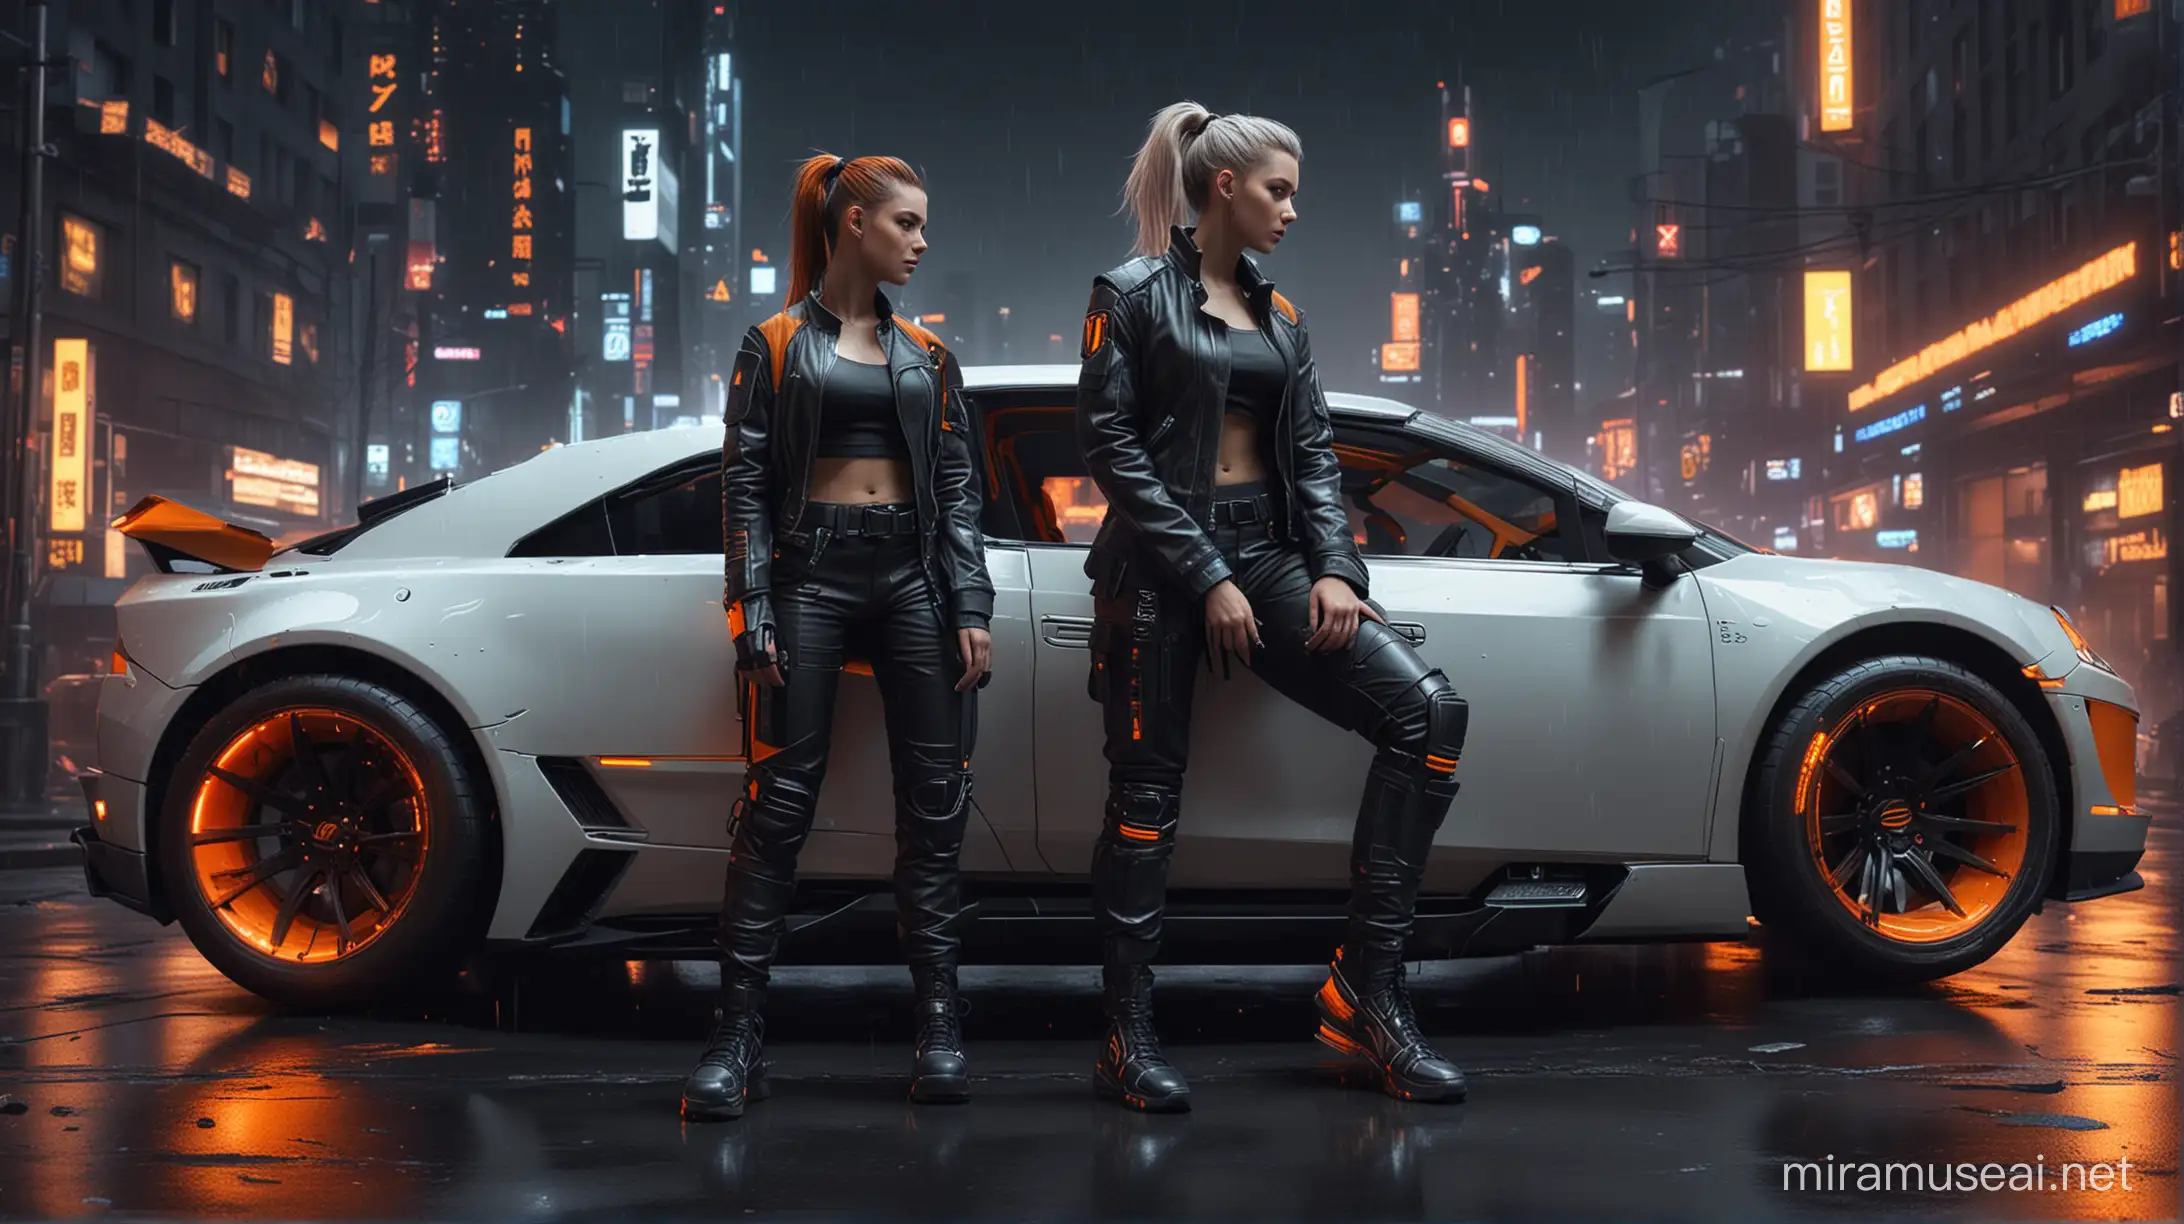 cyberpunk heterosexual couple, undercut ponytail topknot hairstyles, black leather techwear outfits, white black orange low-top ergonomic futuristic hi-tech sneakers, leaning on futuristic luxury cyberpunk car with thick glowing tires, dimly neon-lit cityscape nighttime, gritty videogame 3d render character duo painting splash